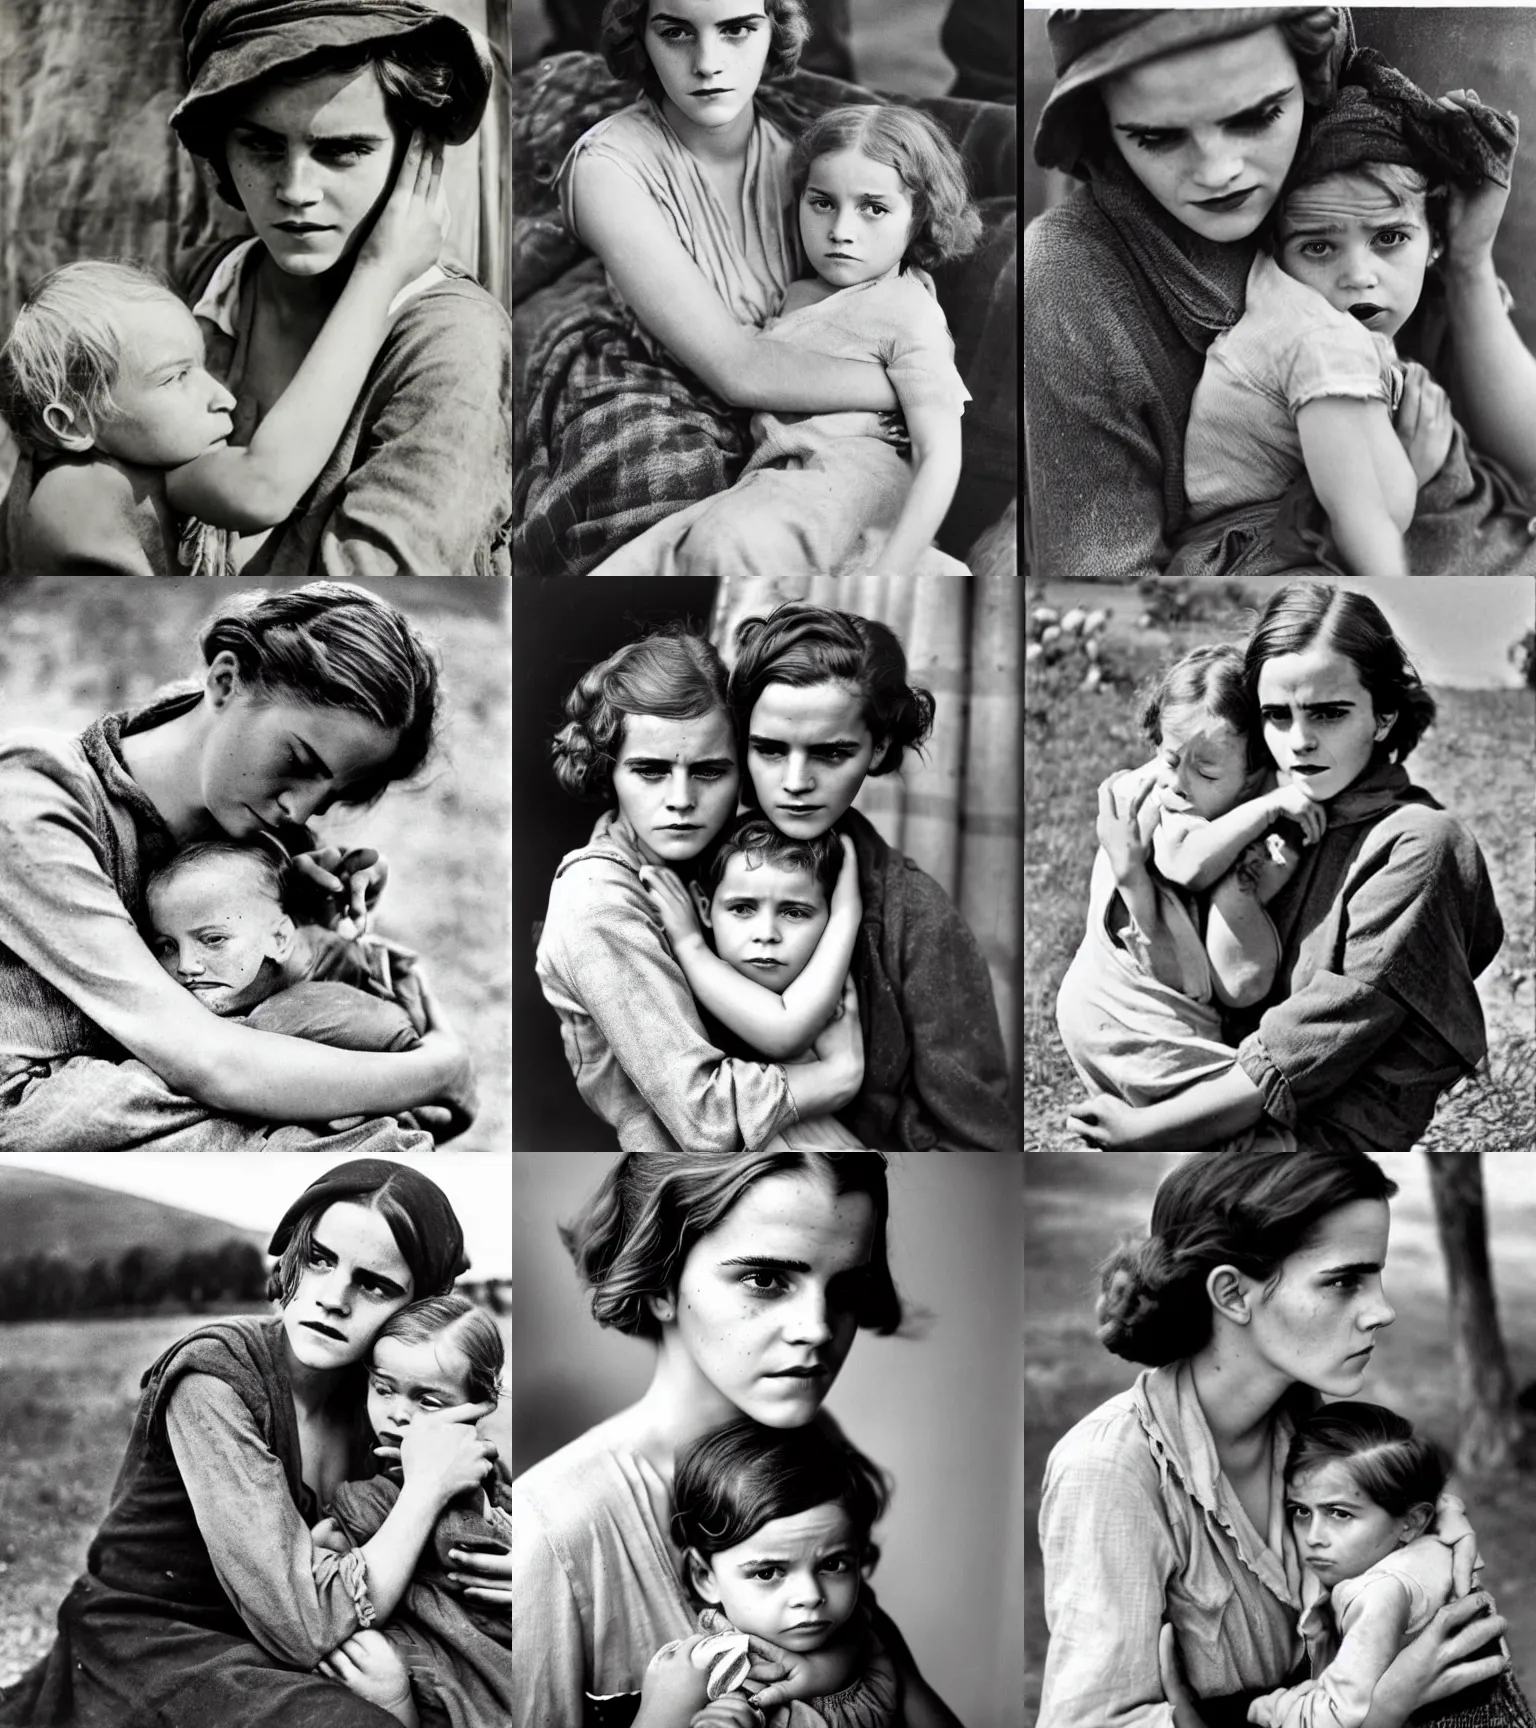 Prompt: Old, aged, lined Emma Watson as migrant mother, 1936, gritty depression era photo by Dorothea Lange